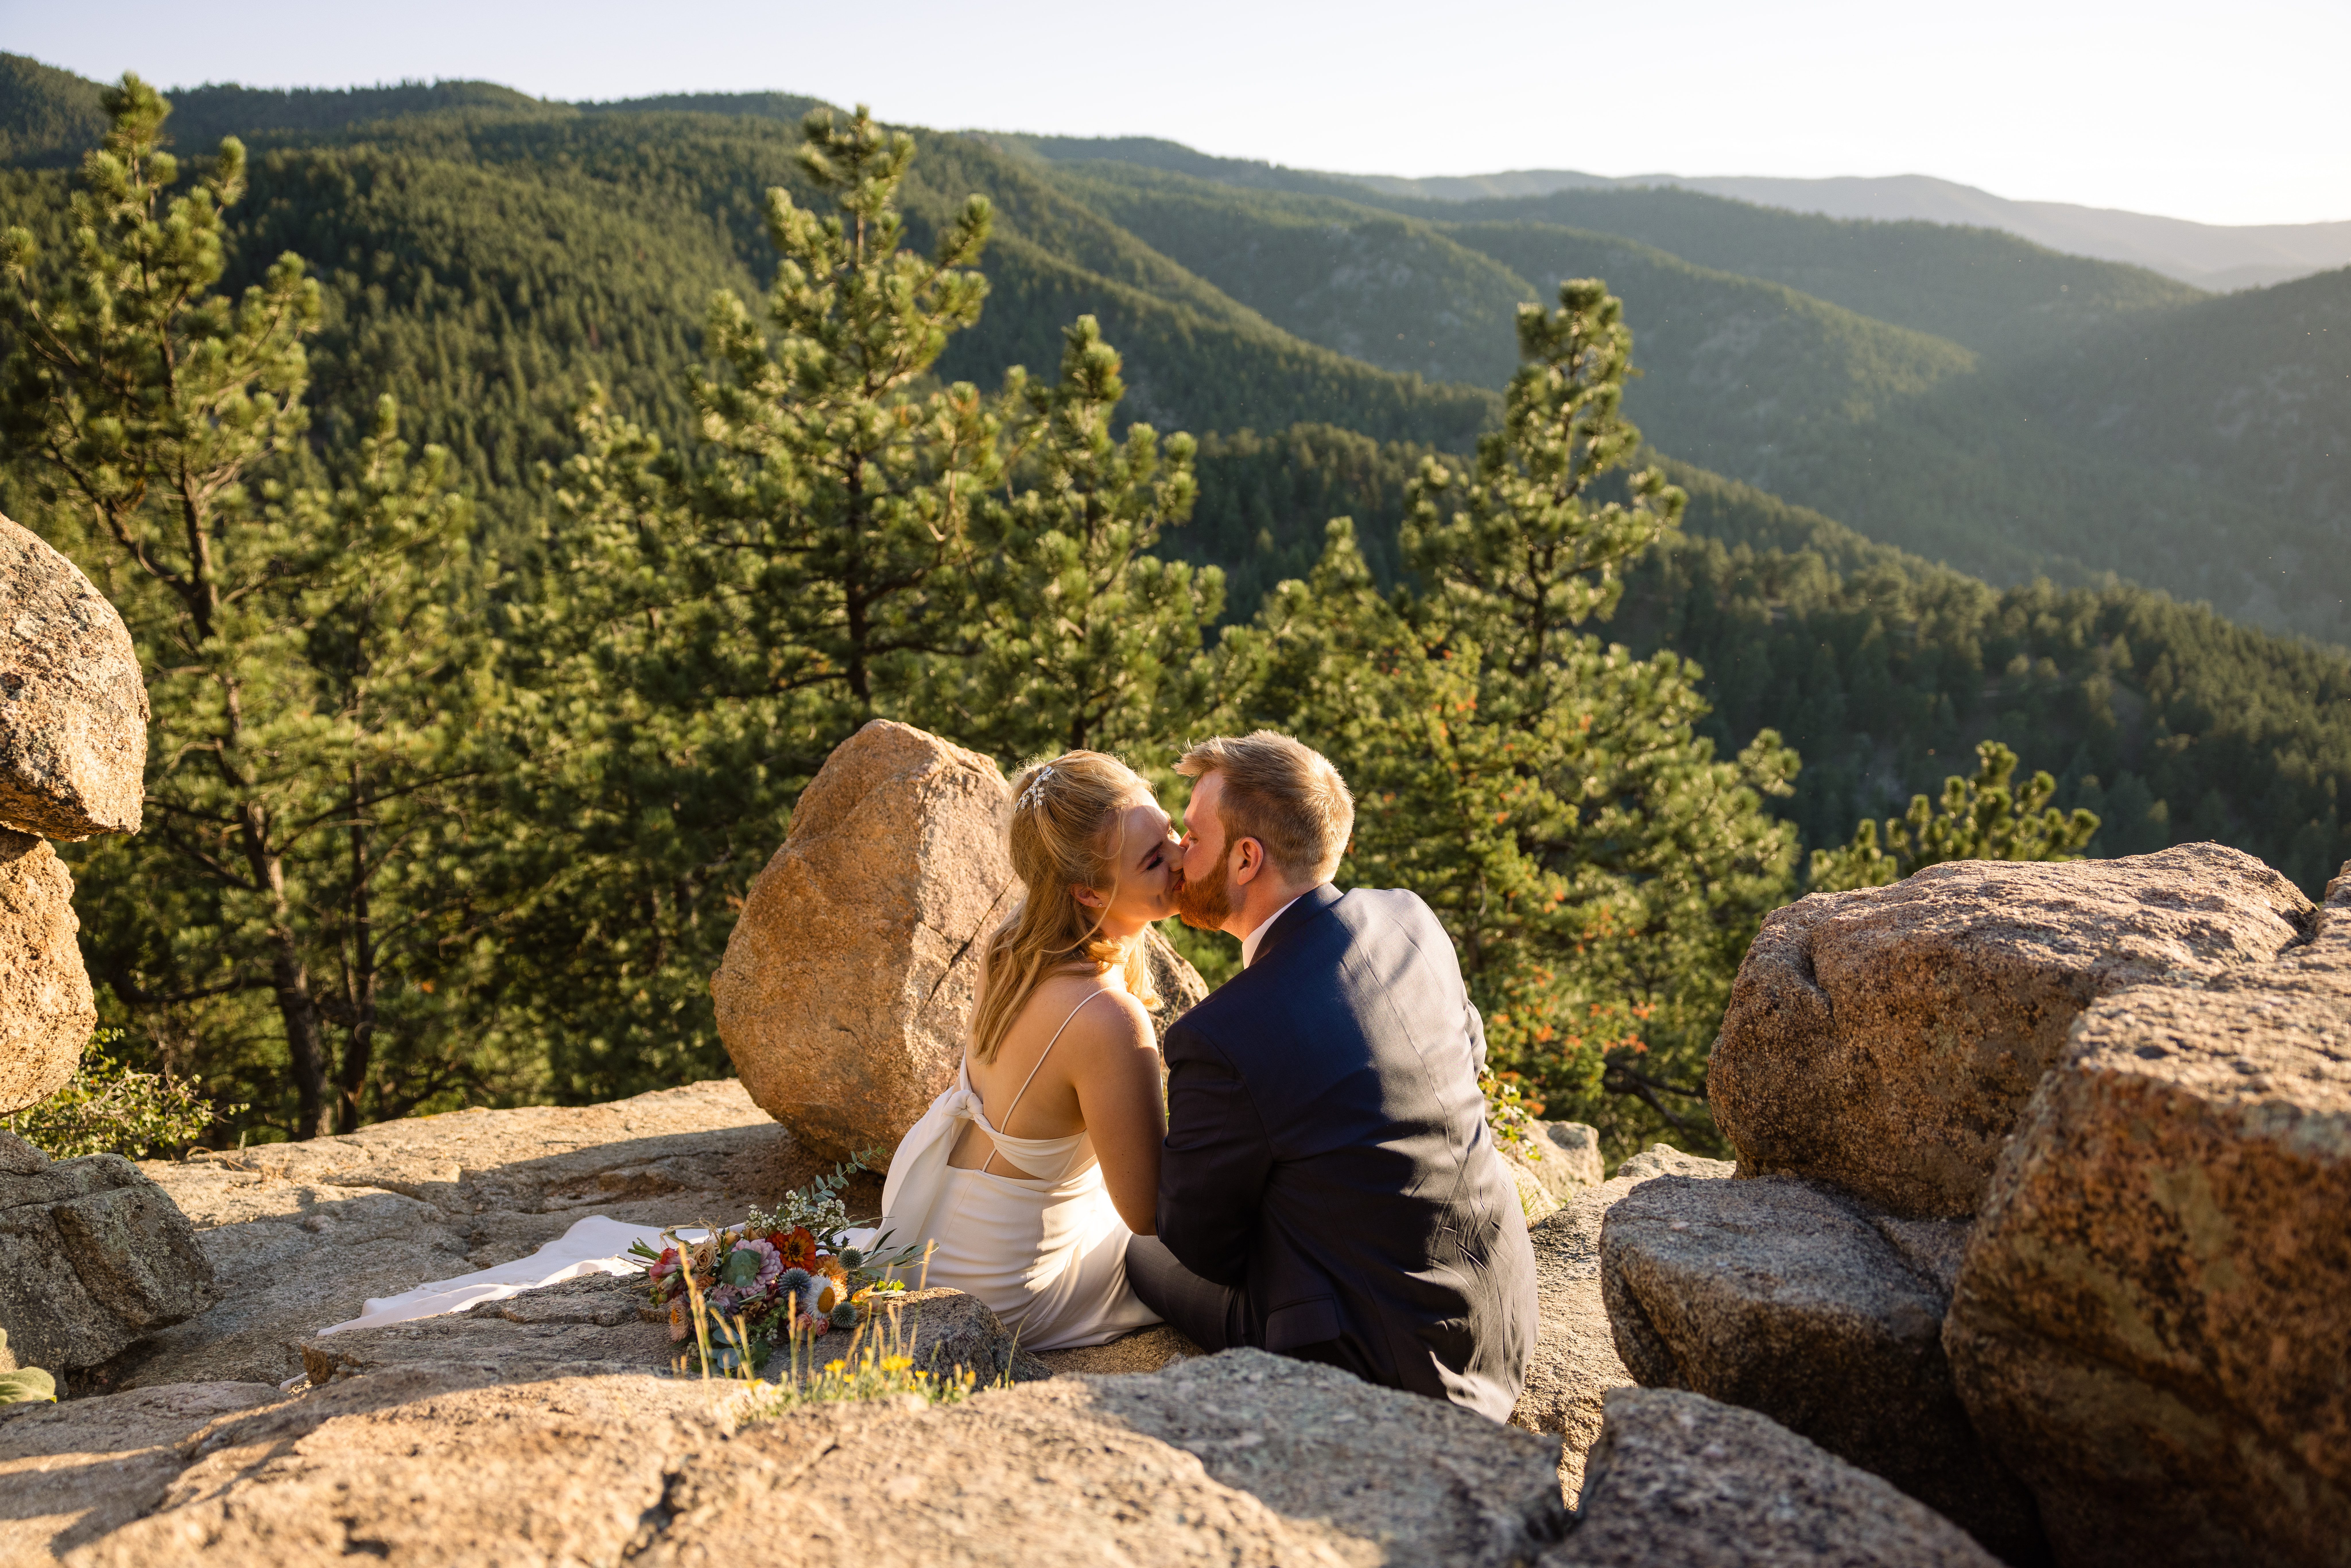 The bride and groom on top of the mountain kissing after reading notes to each other on their Sunrise Amphitheater wedding.